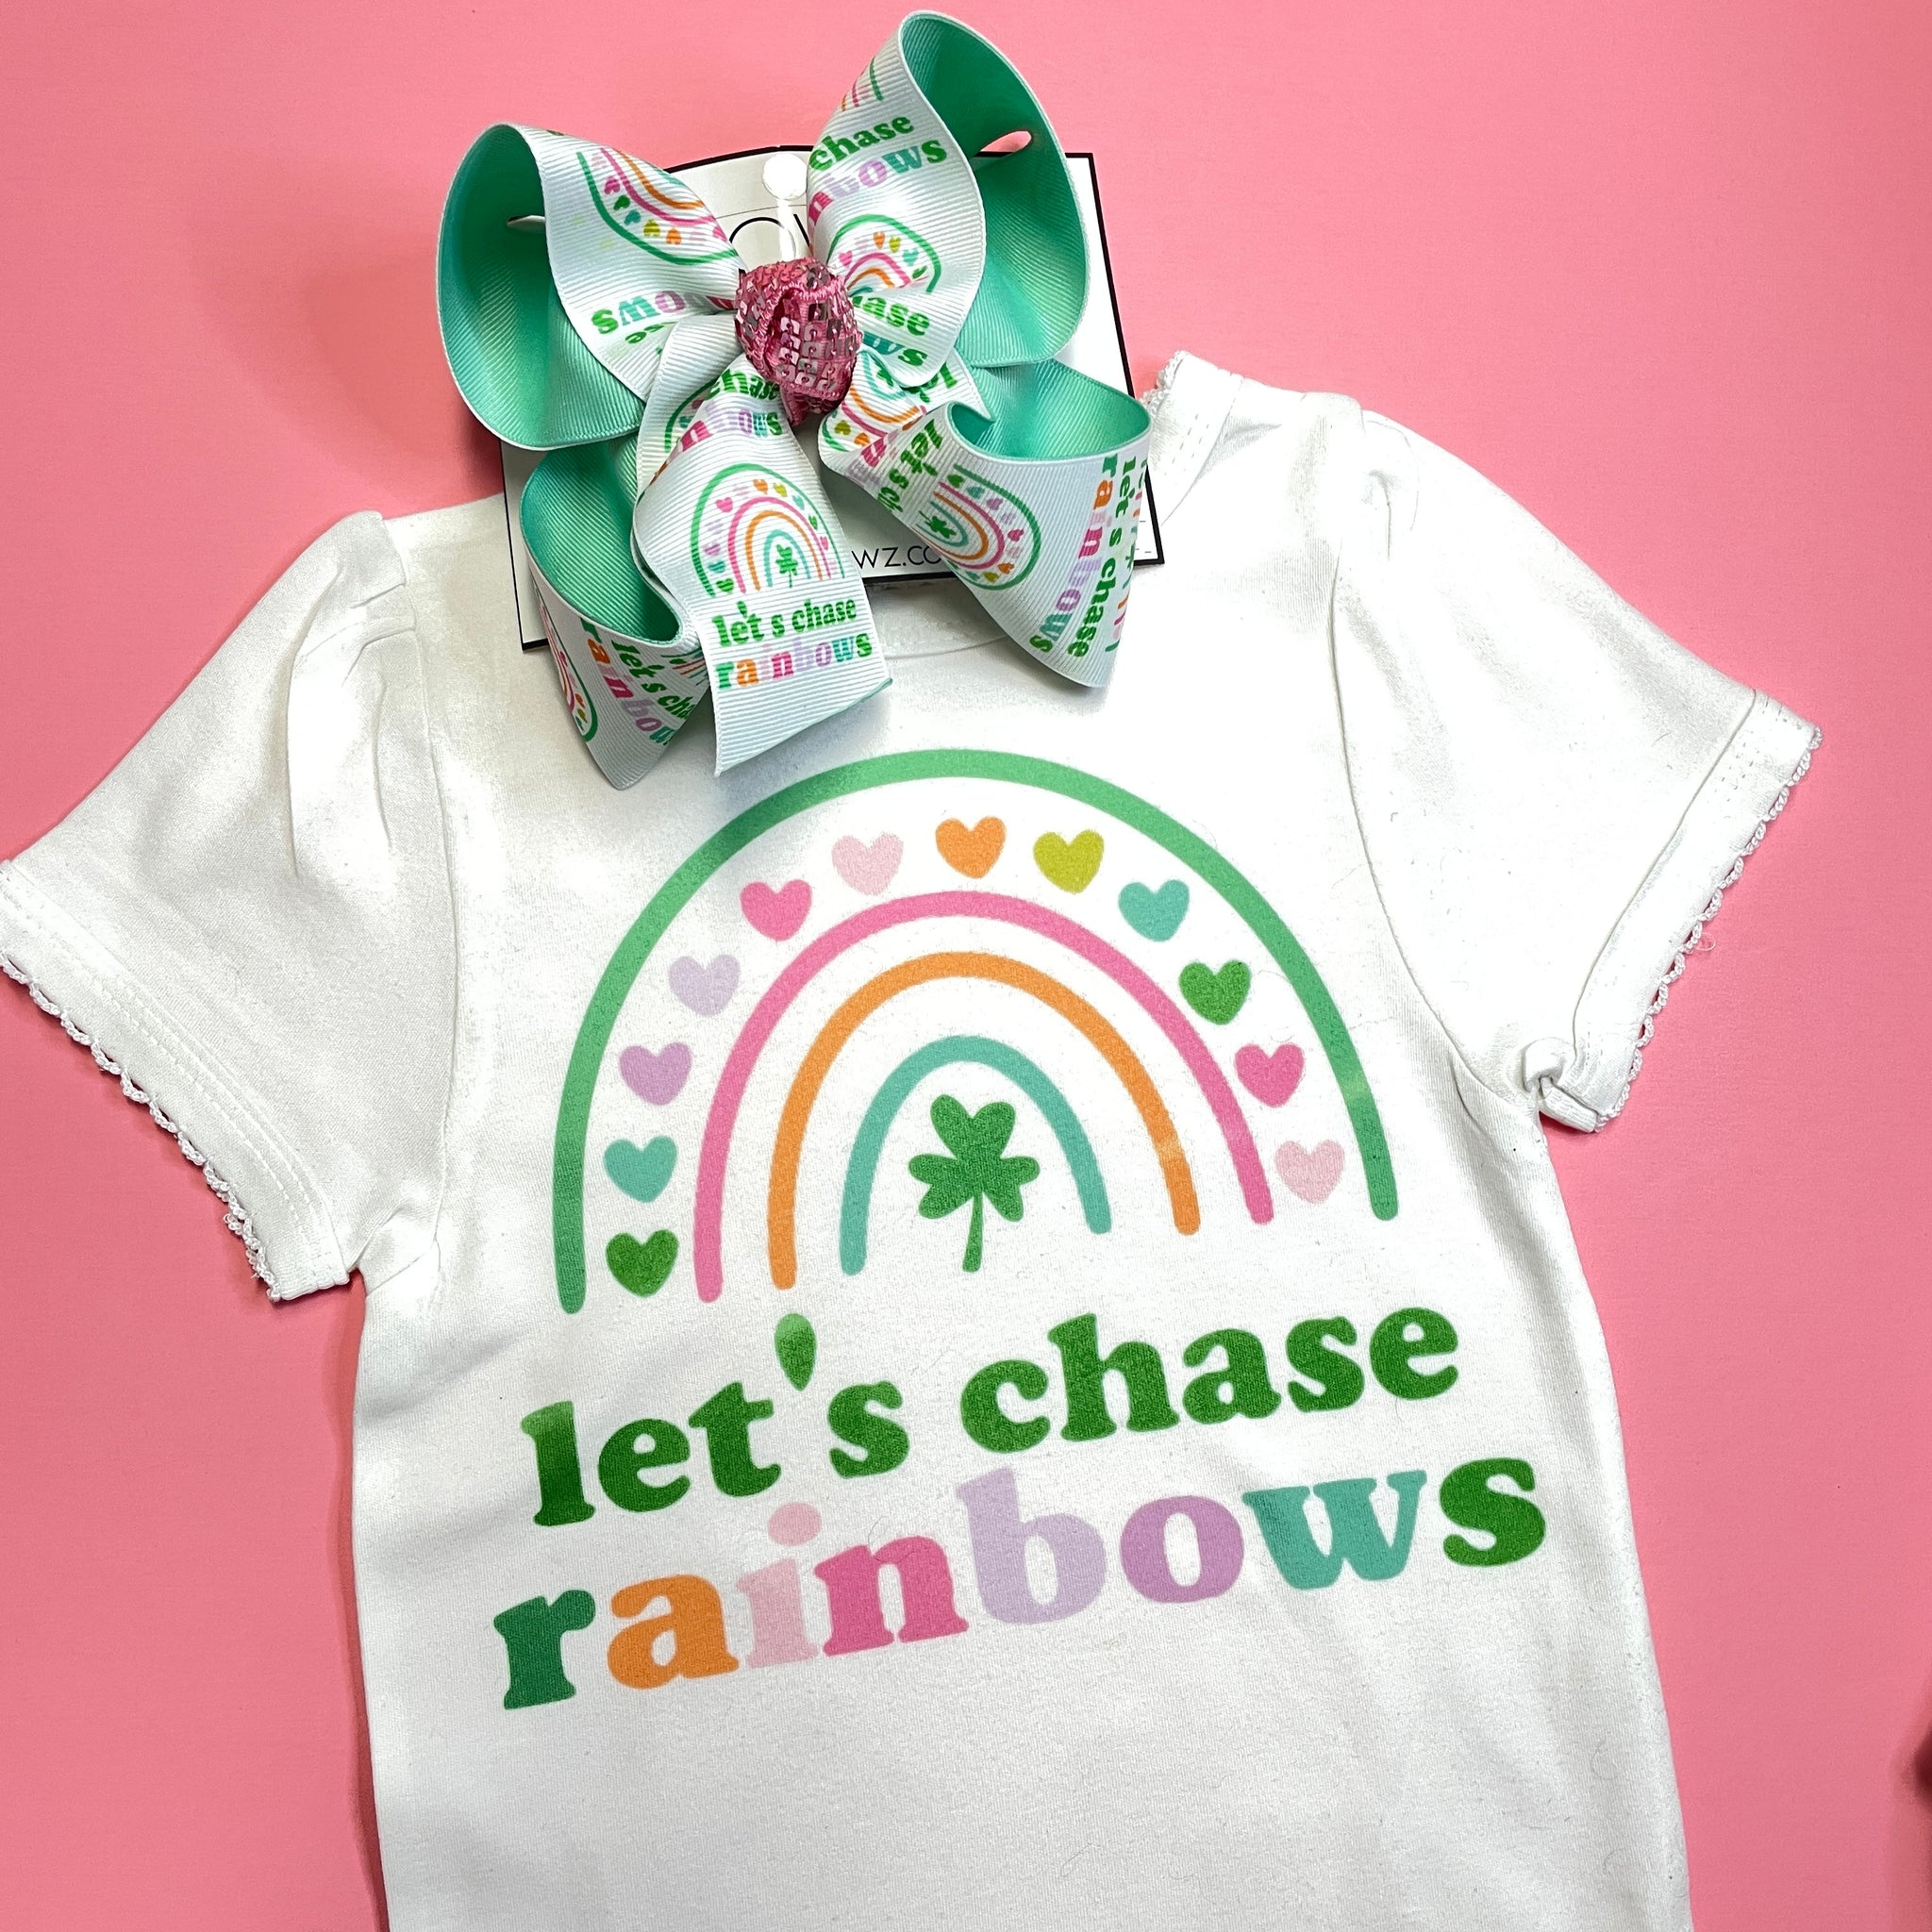 Let's Chase Rainbows Tee and Matching Hairbow ~ Great for Patties Day or Every Day ~Graphic Tee & Boutique Style Hairbow ~ Exclusive iBOWZ design